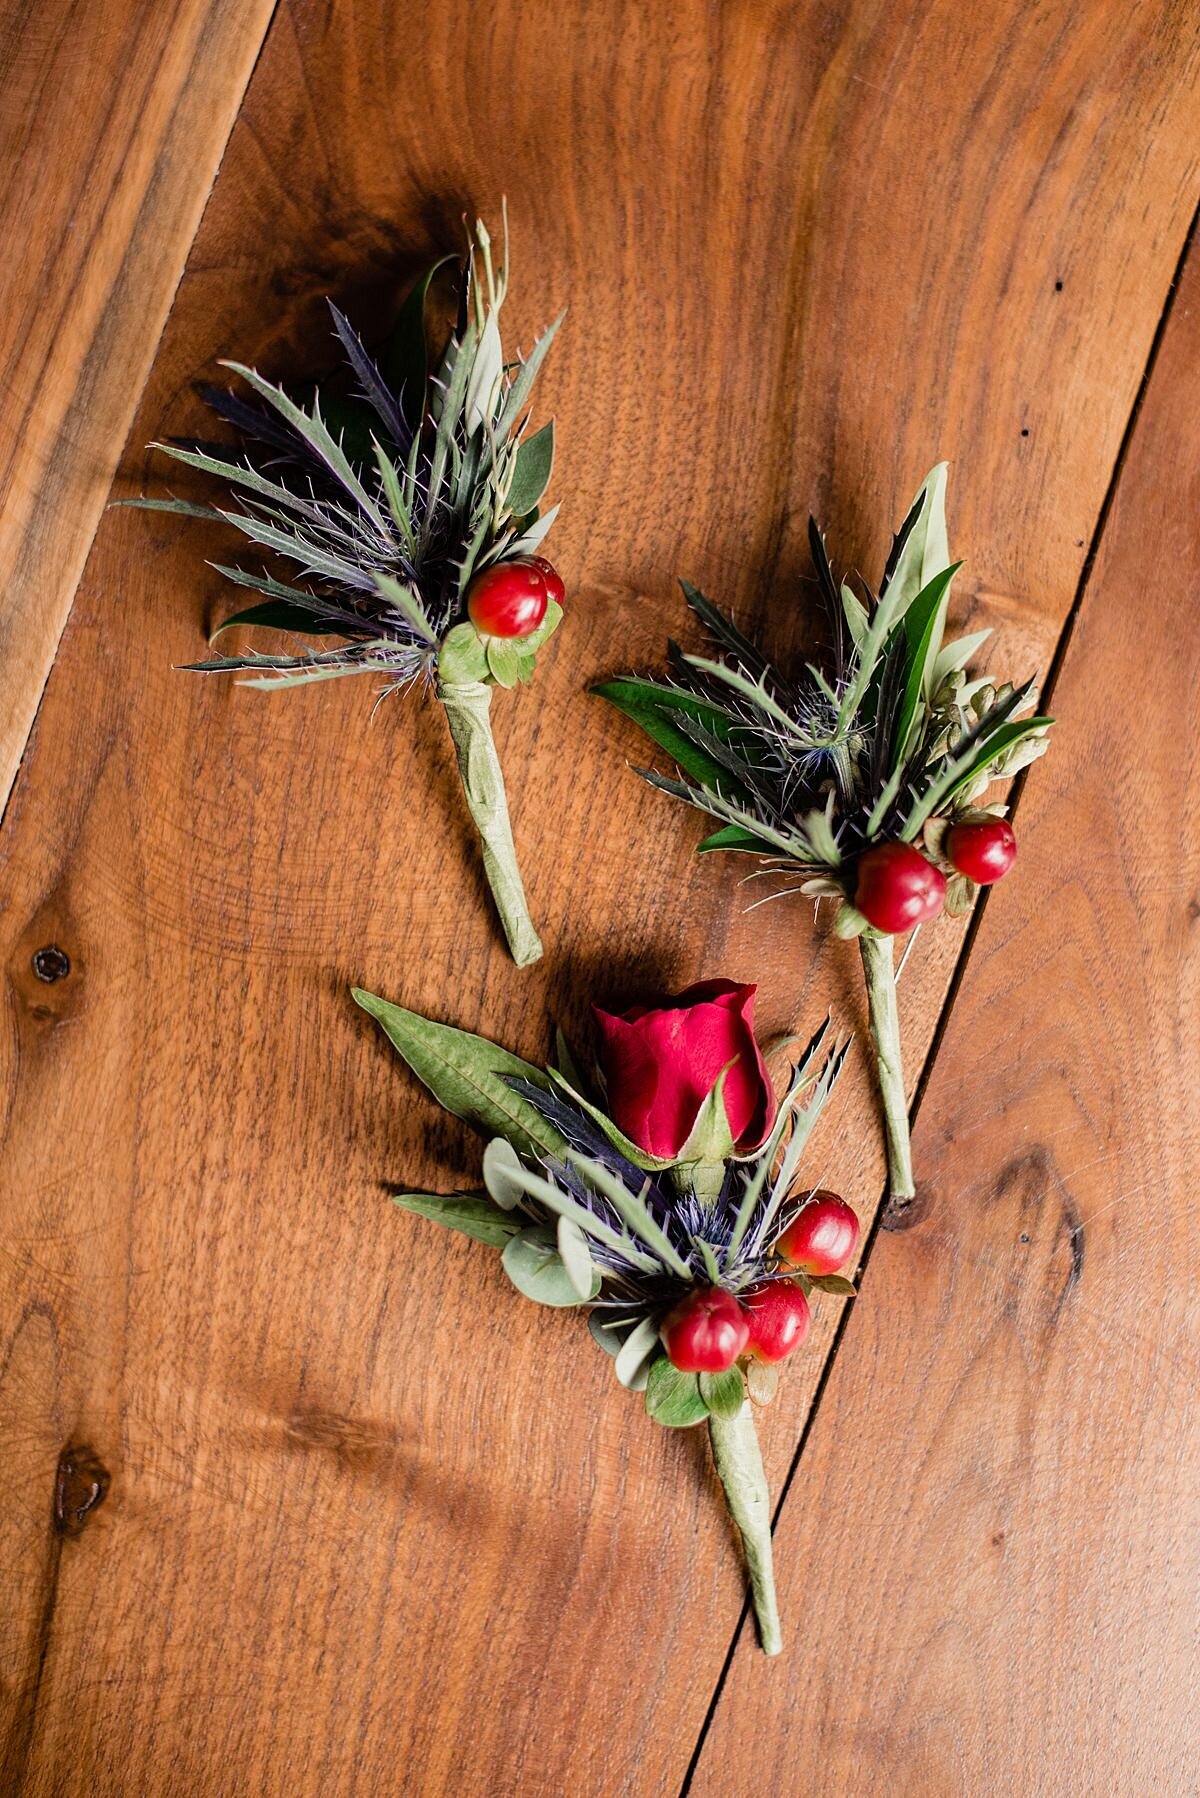 Boutonnieres with red berries, blue thistle and a red rose sit on a farmhouse table.